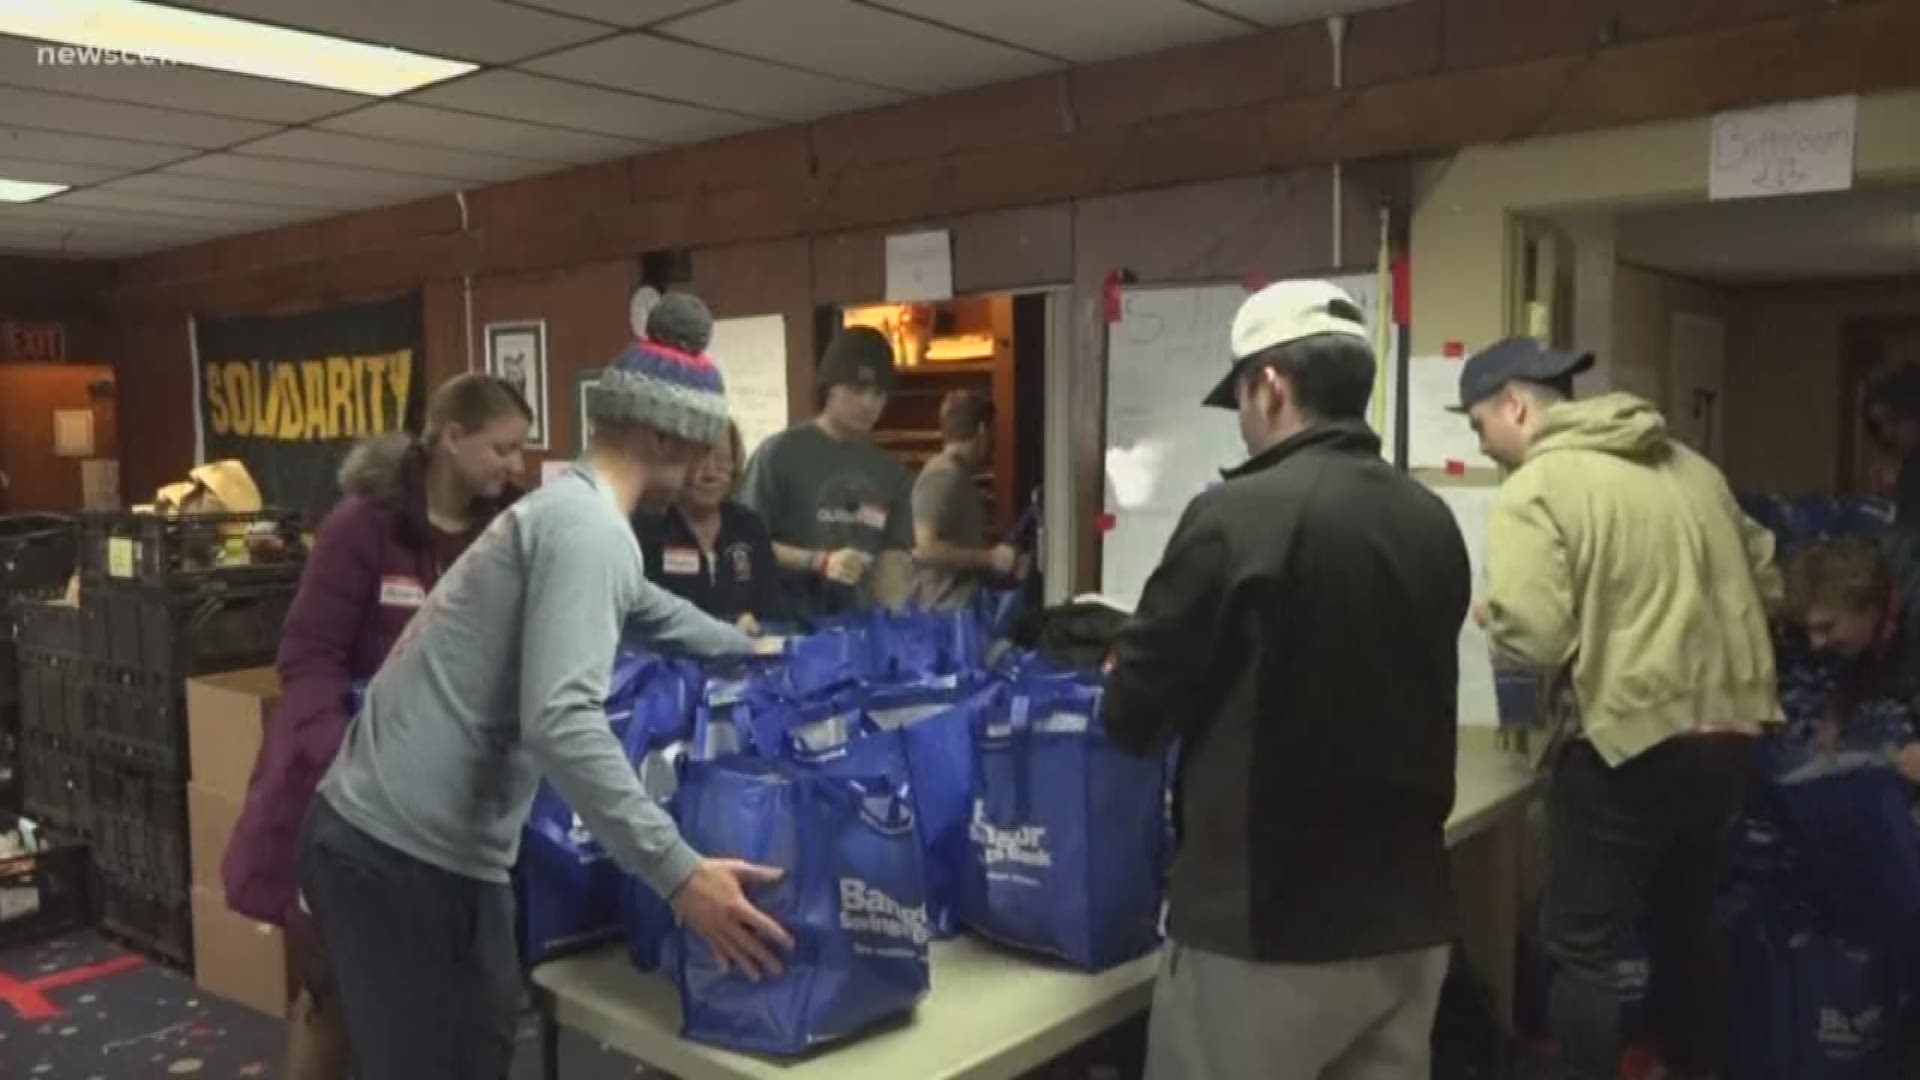 16th annual "Solidarity Harvest" gives a thanksgiving meal for 1,300 Maine families.